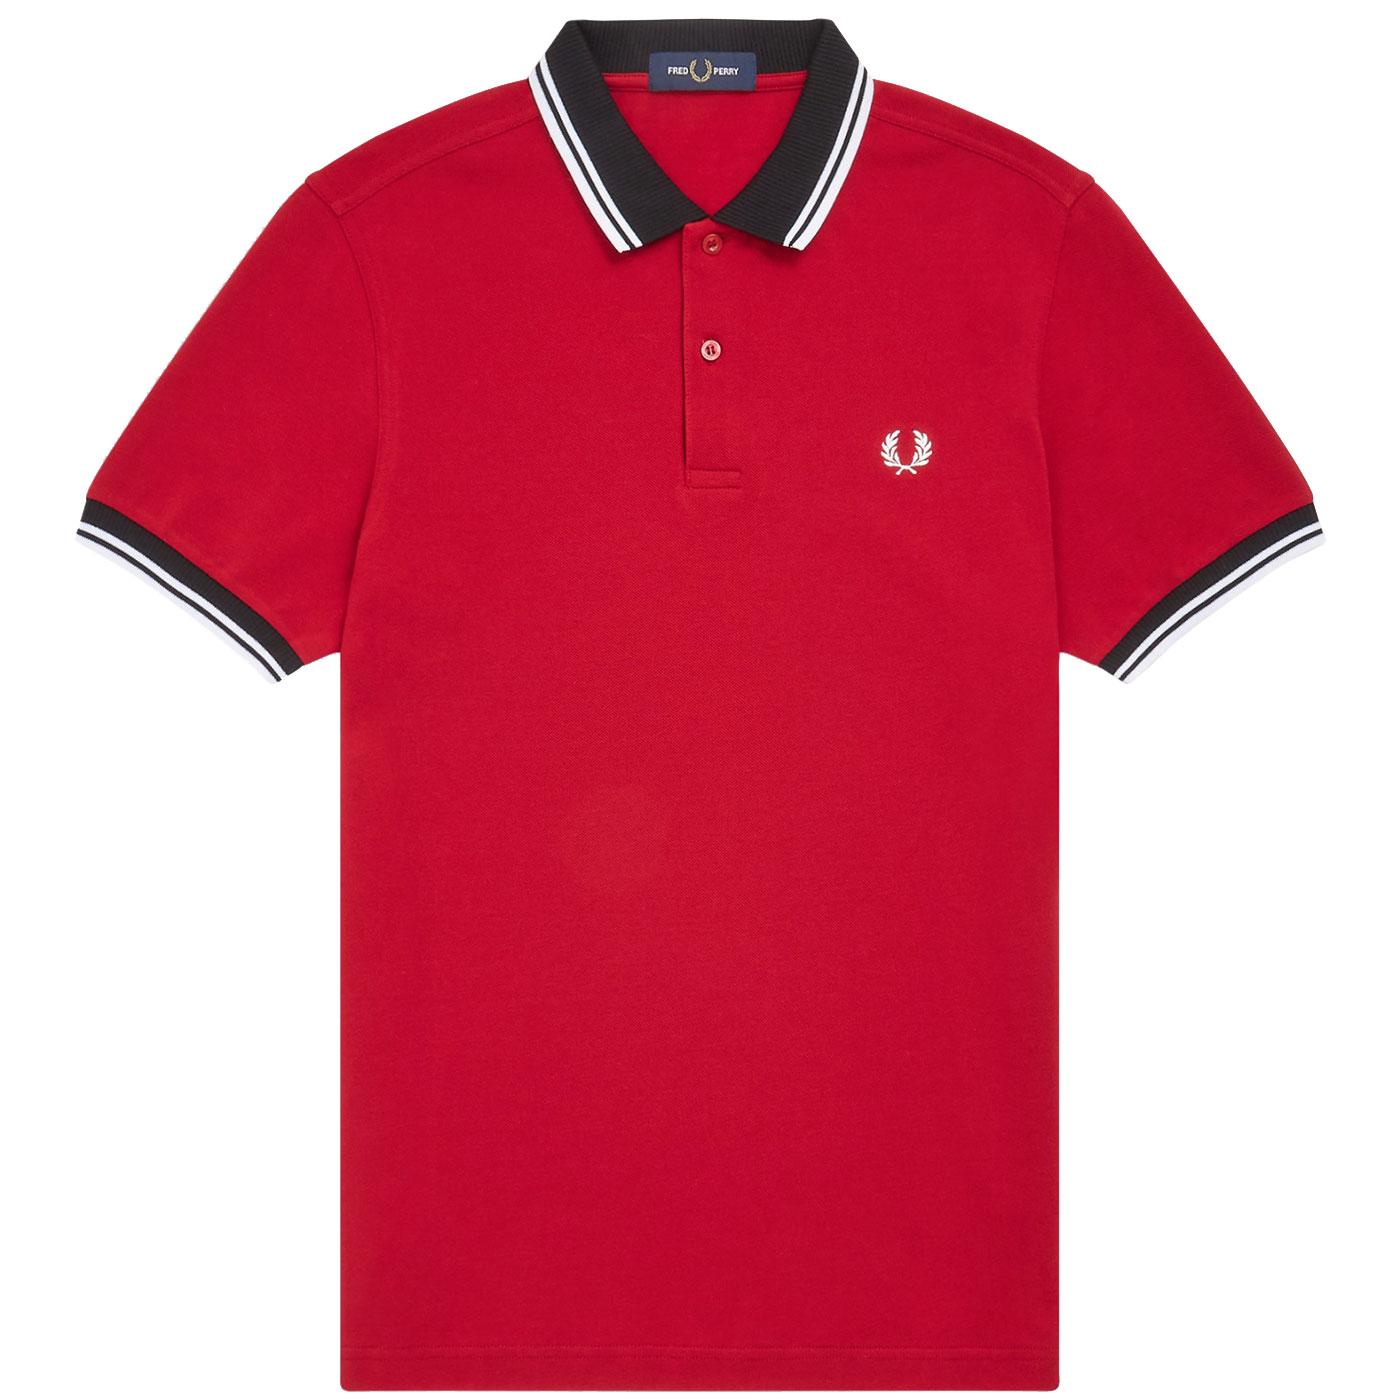 FRED PERRY Contrast Trim Tipped Mod Pique Polo S